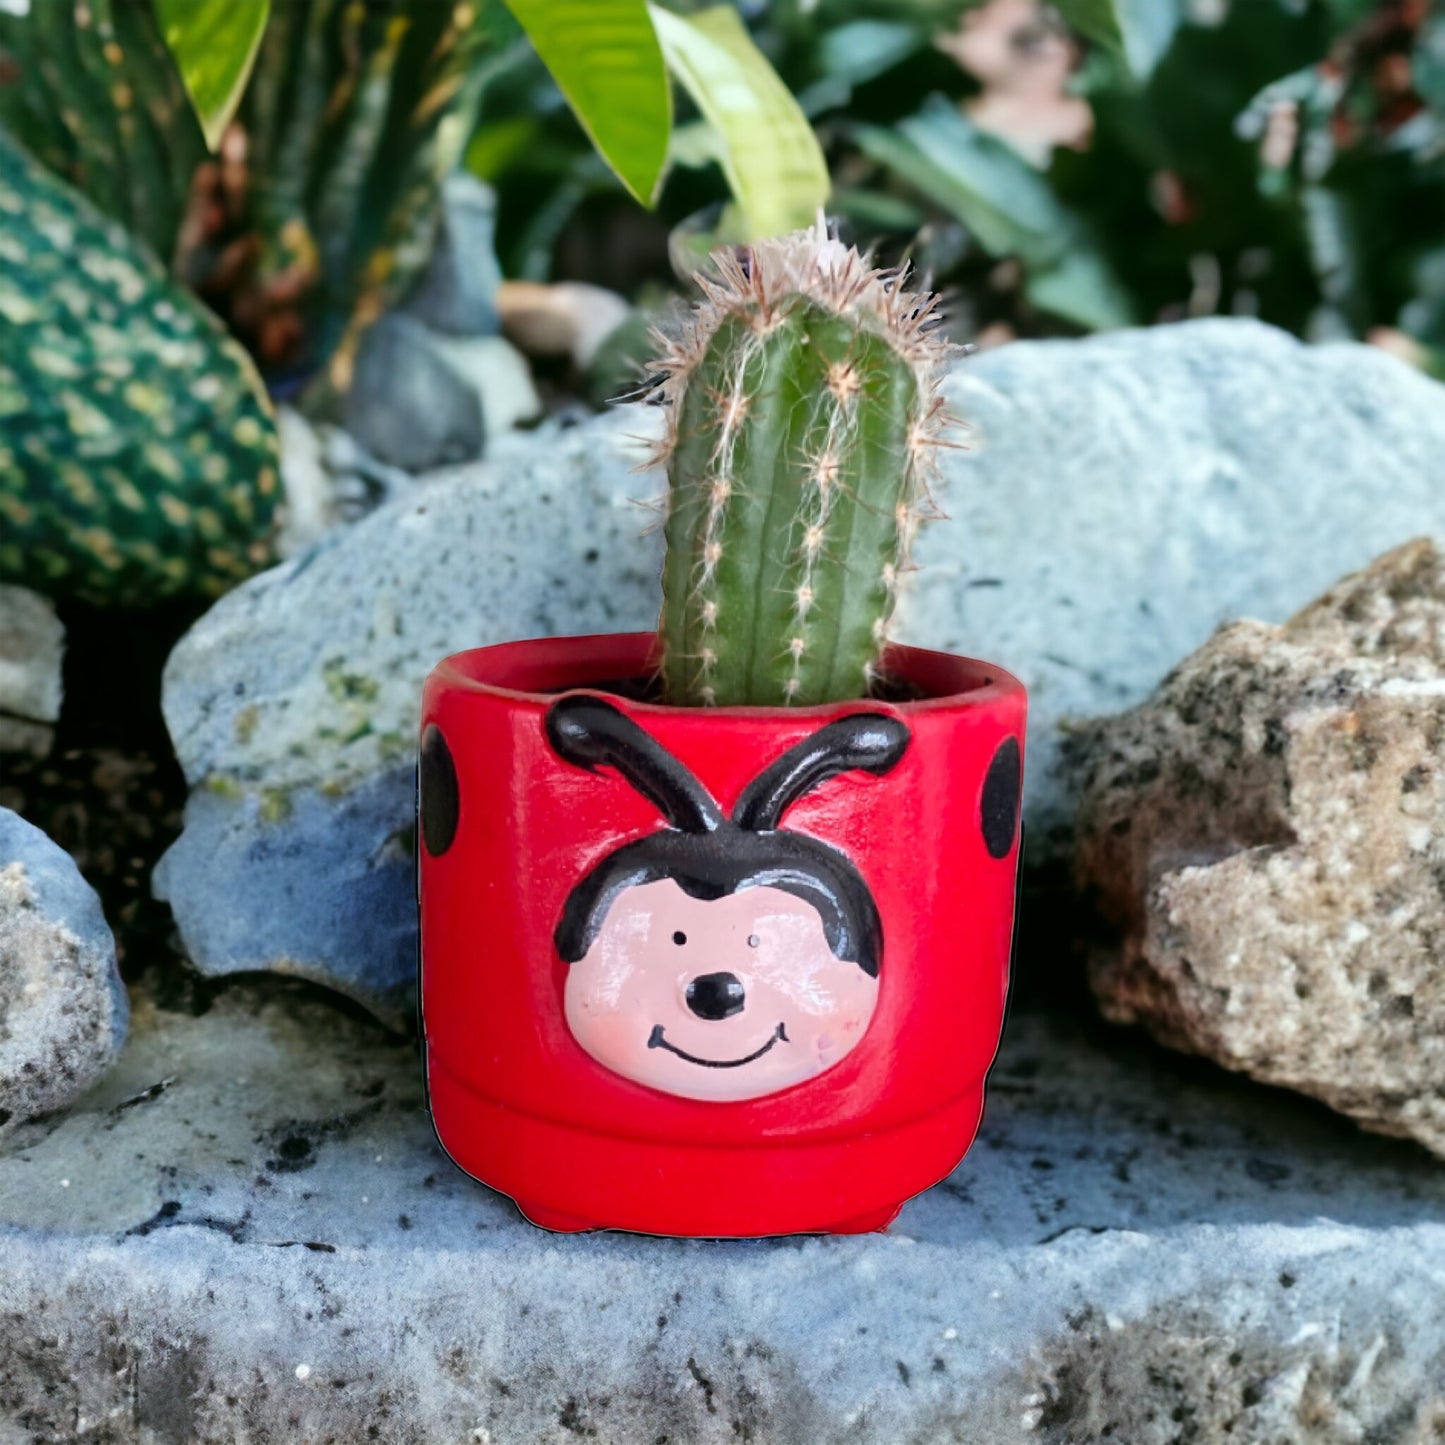 Plant Pot Planter Ladybird Beetle - The Renmy Store Homewares & Gifts 